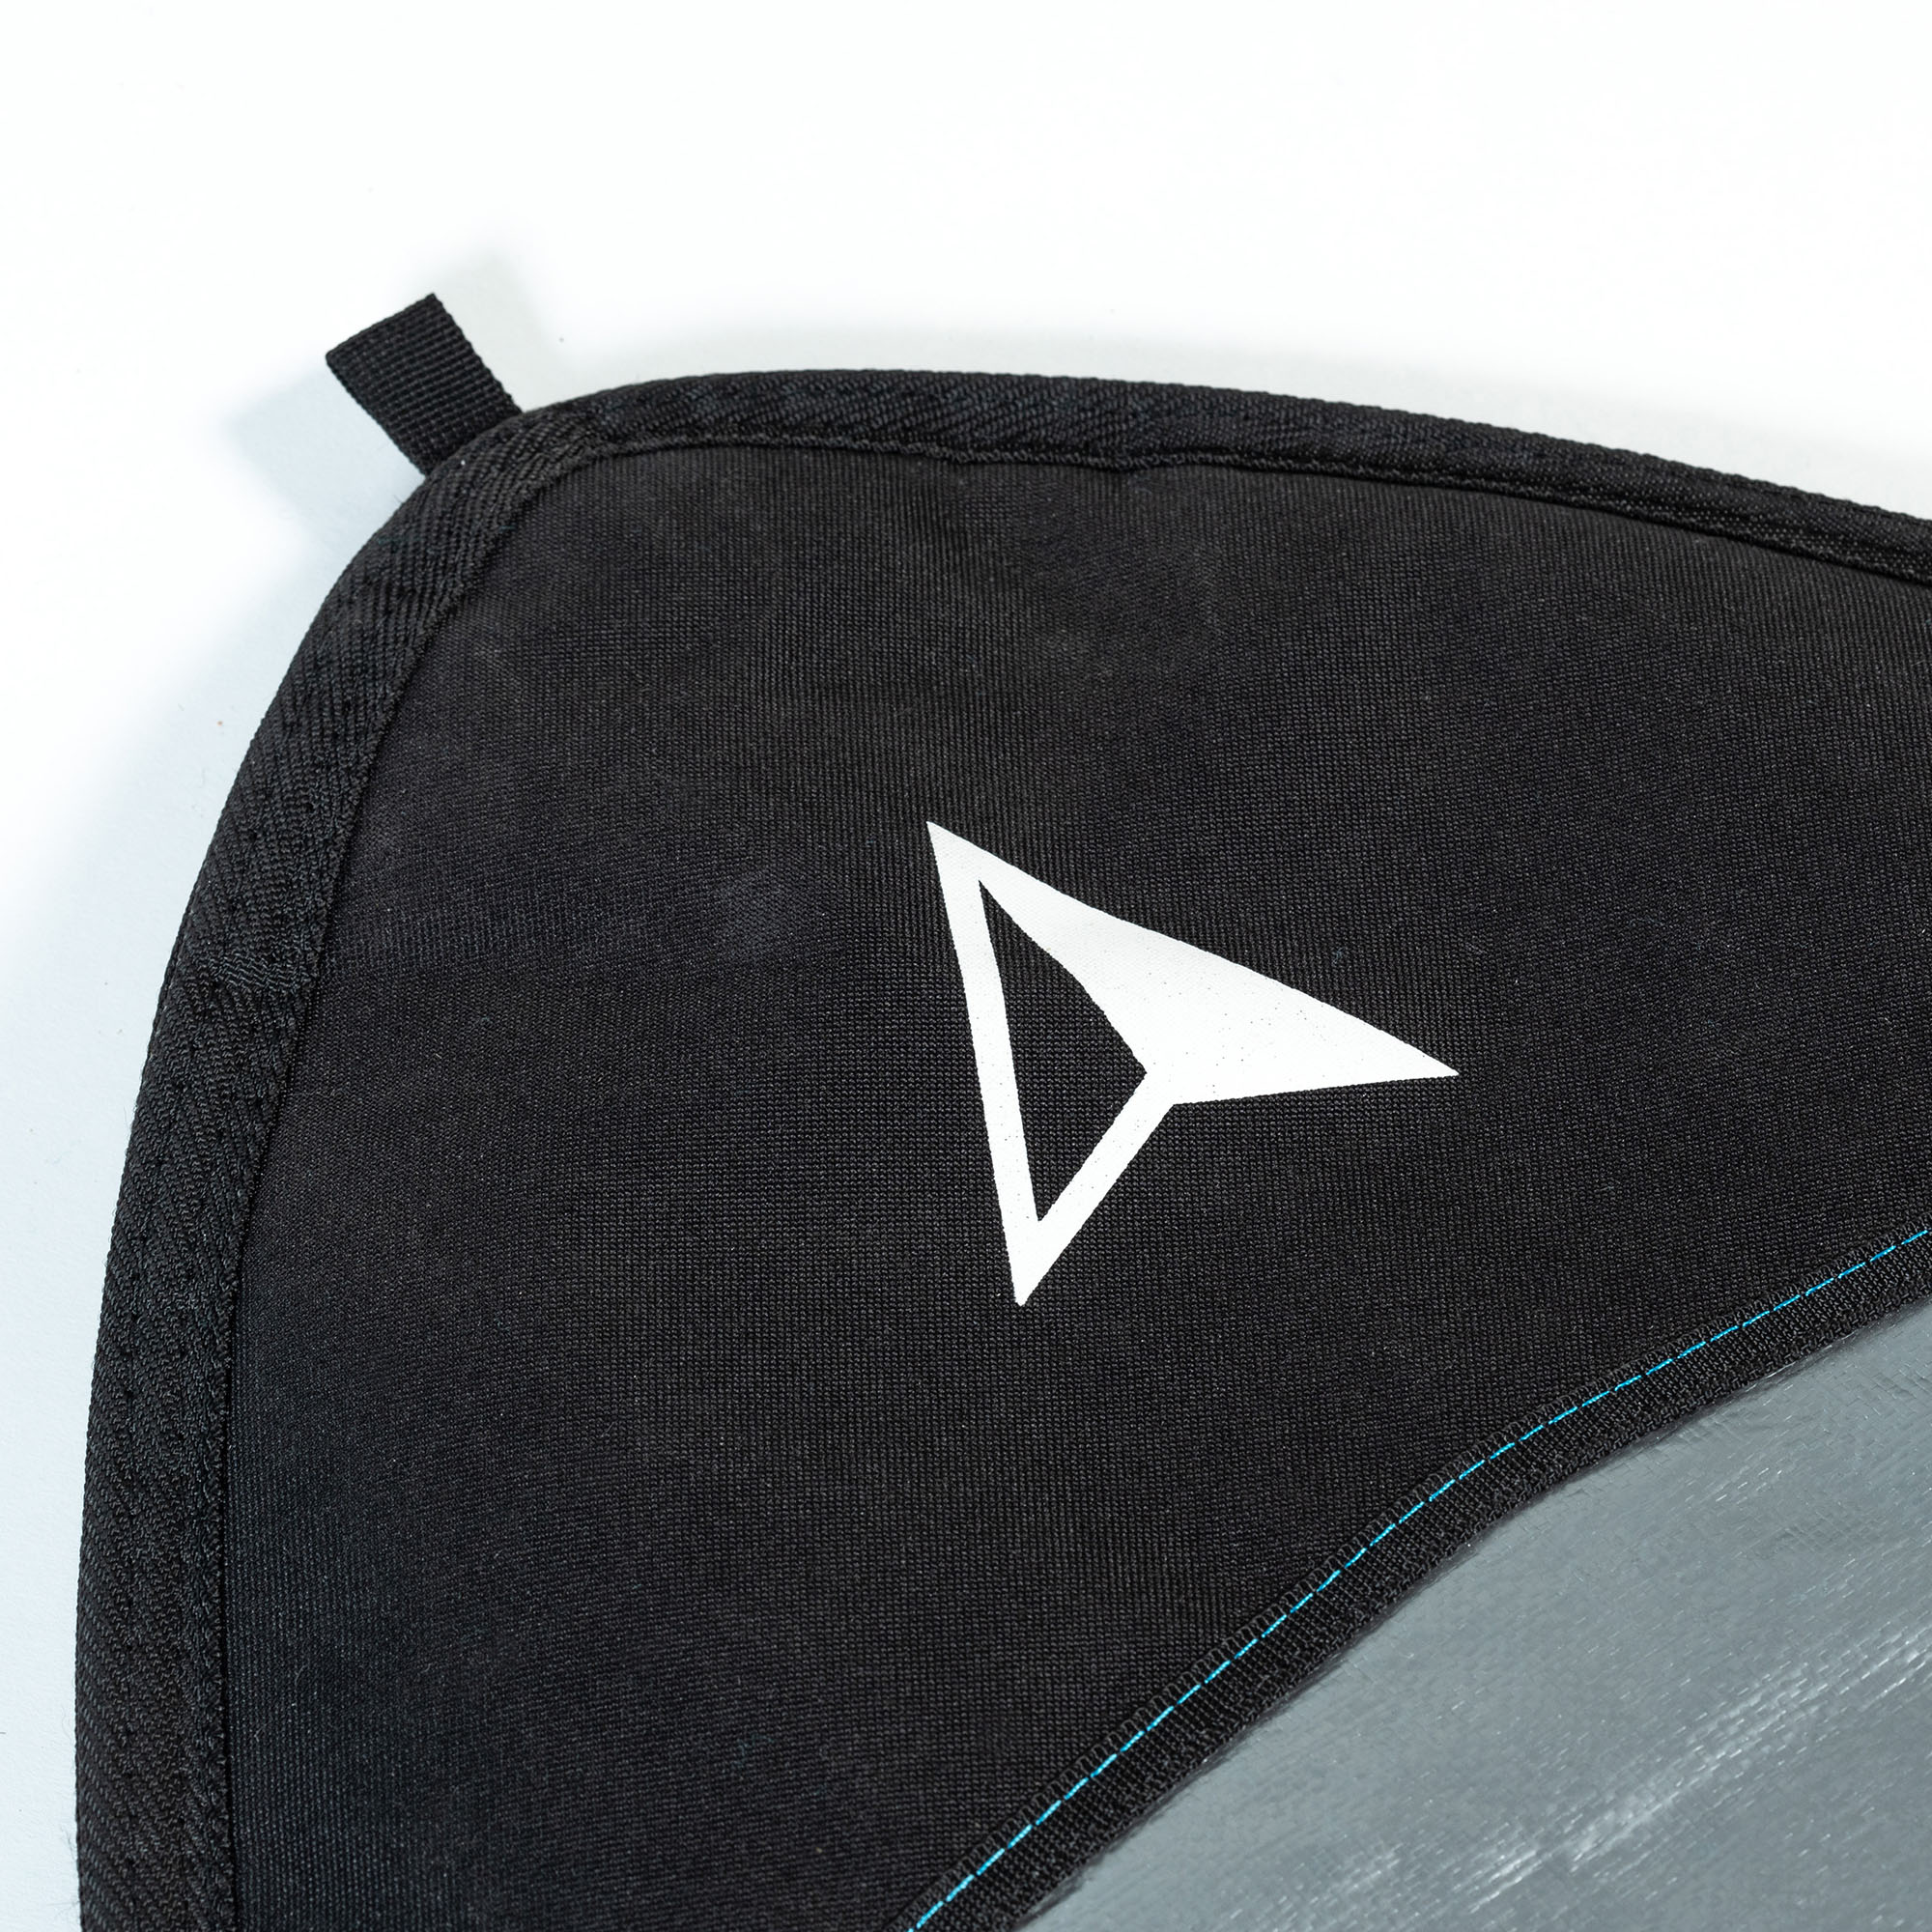 ROAM Boardbag Surfboard Tech Bag Hybrid Fish - REINFORCED NOSE AND TAIL FOR EXTRA PROTECTION (WITH UTILITY LOOP)